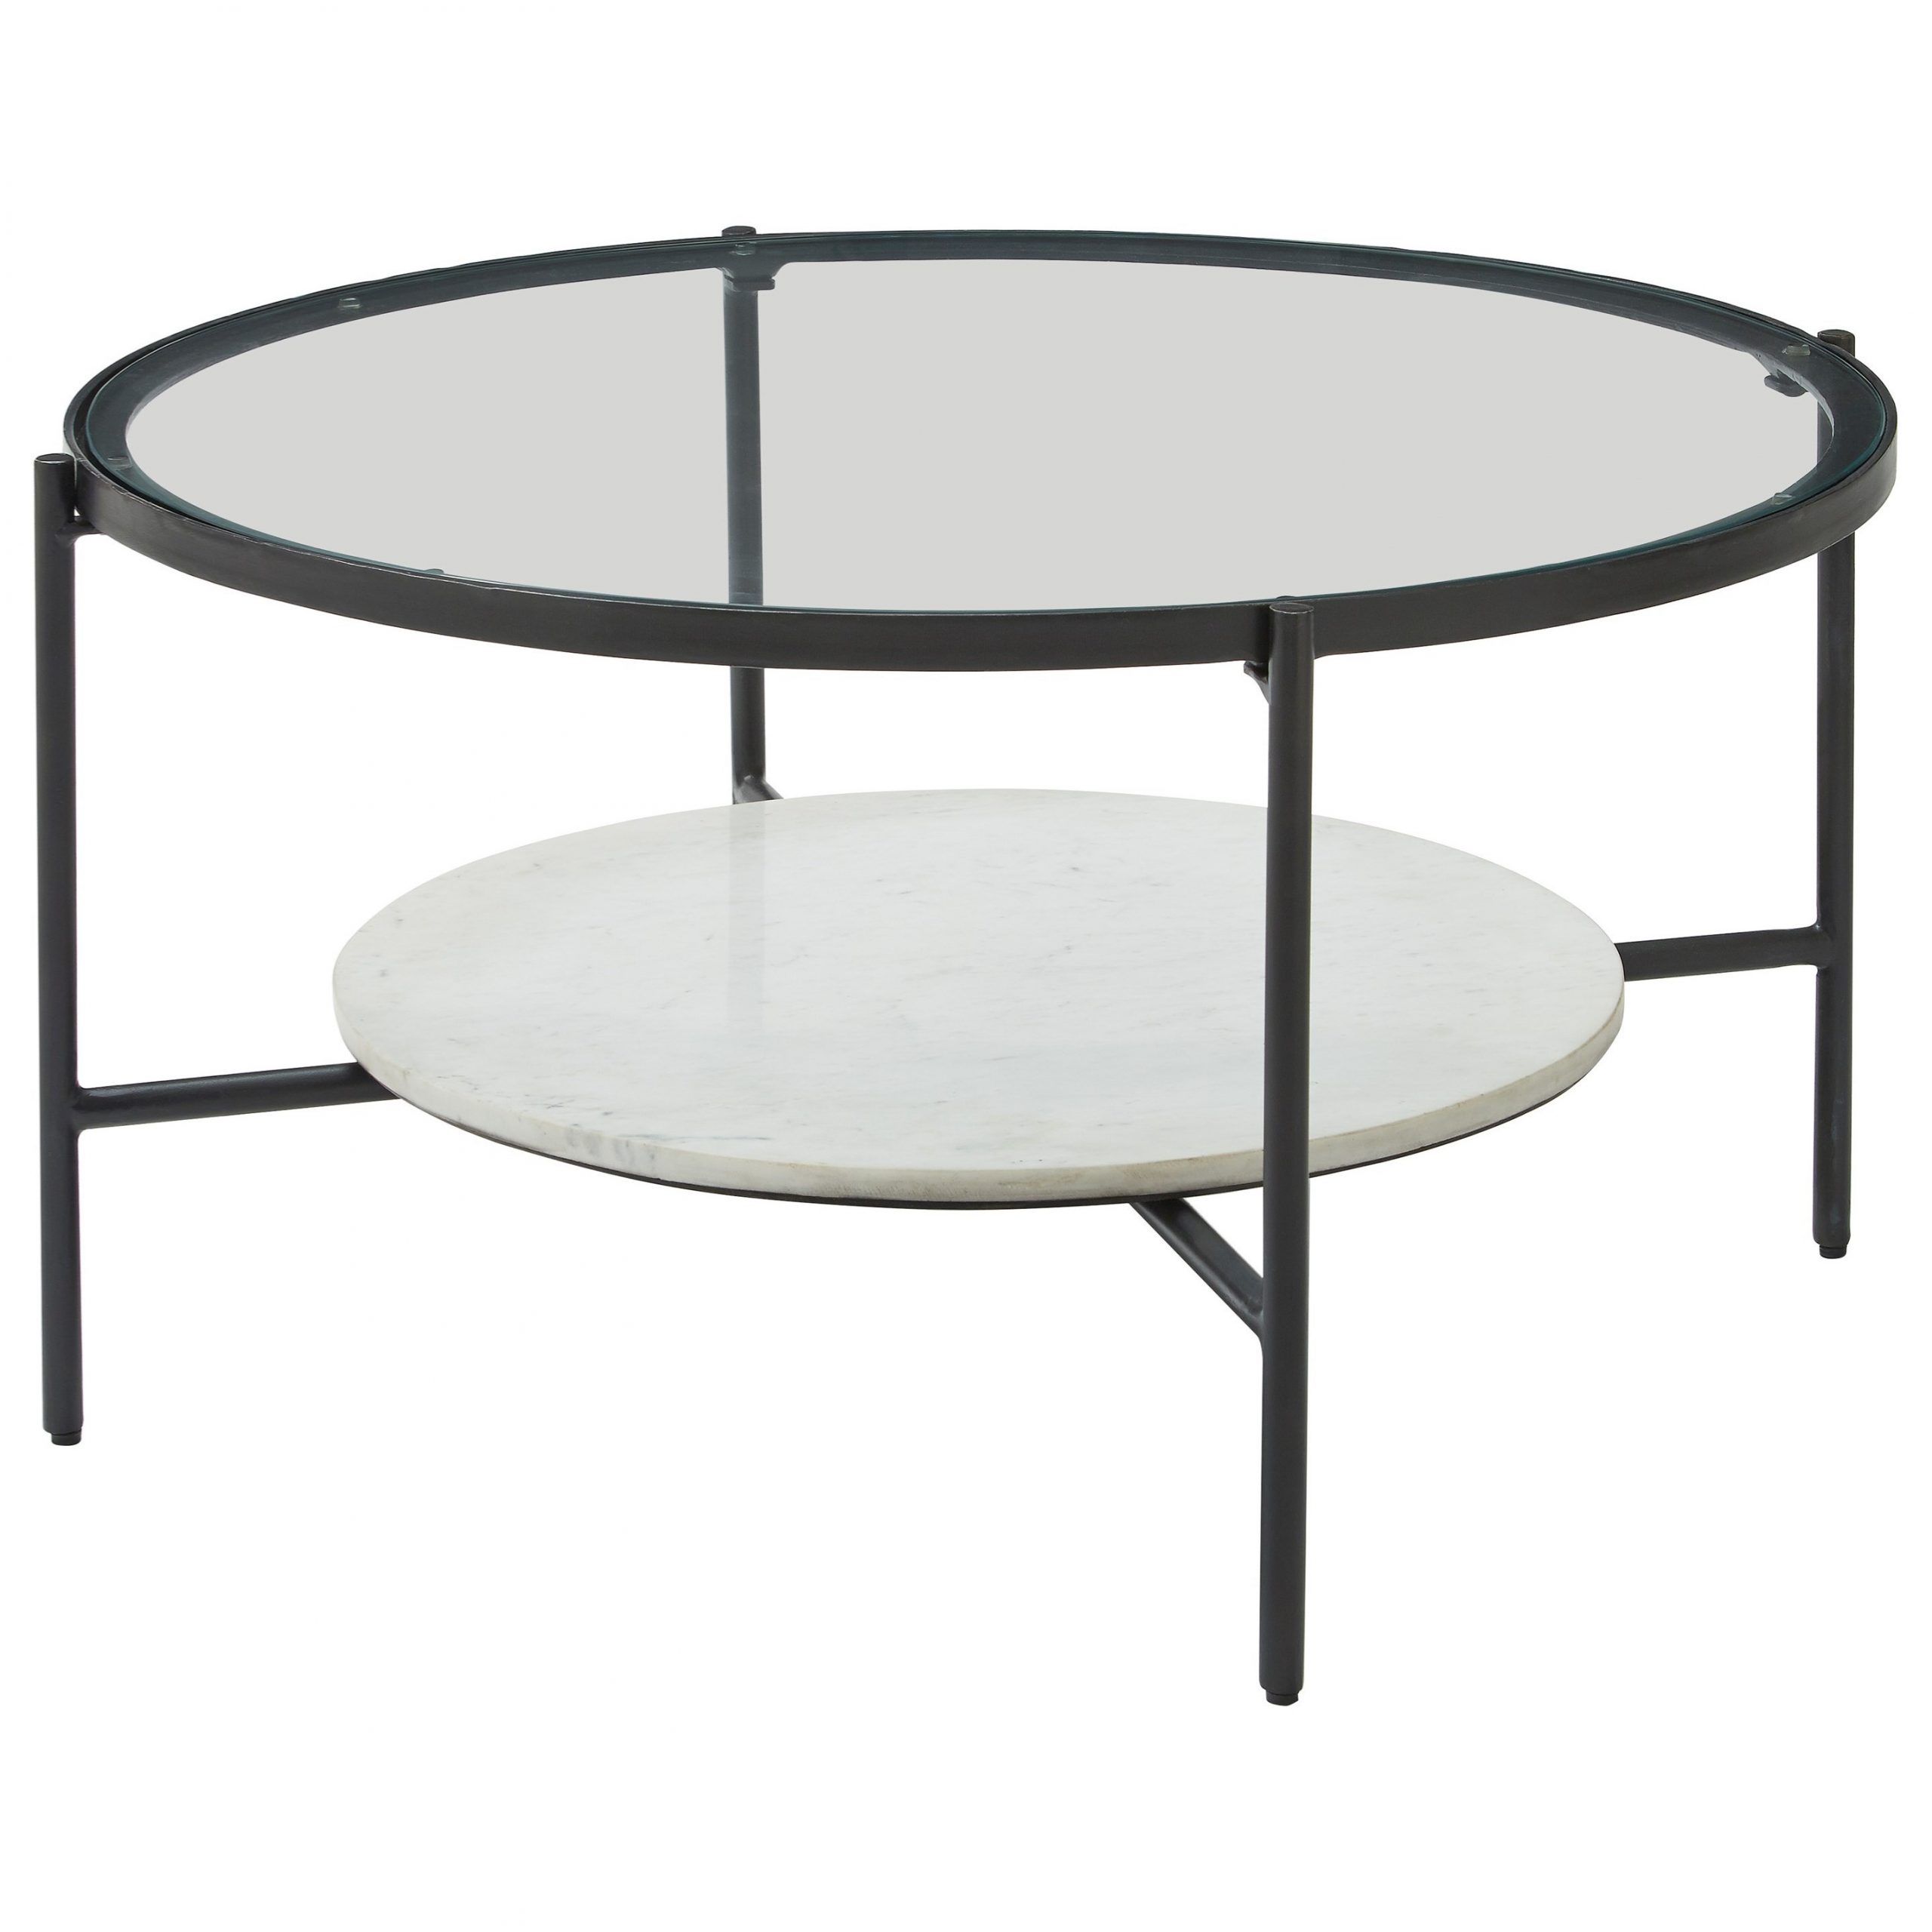 Signature Zia Black Metal Round Cocktail Table With Glass Inside Newest Black Round Glass Top Cocktail Tables (View 4 of 20)